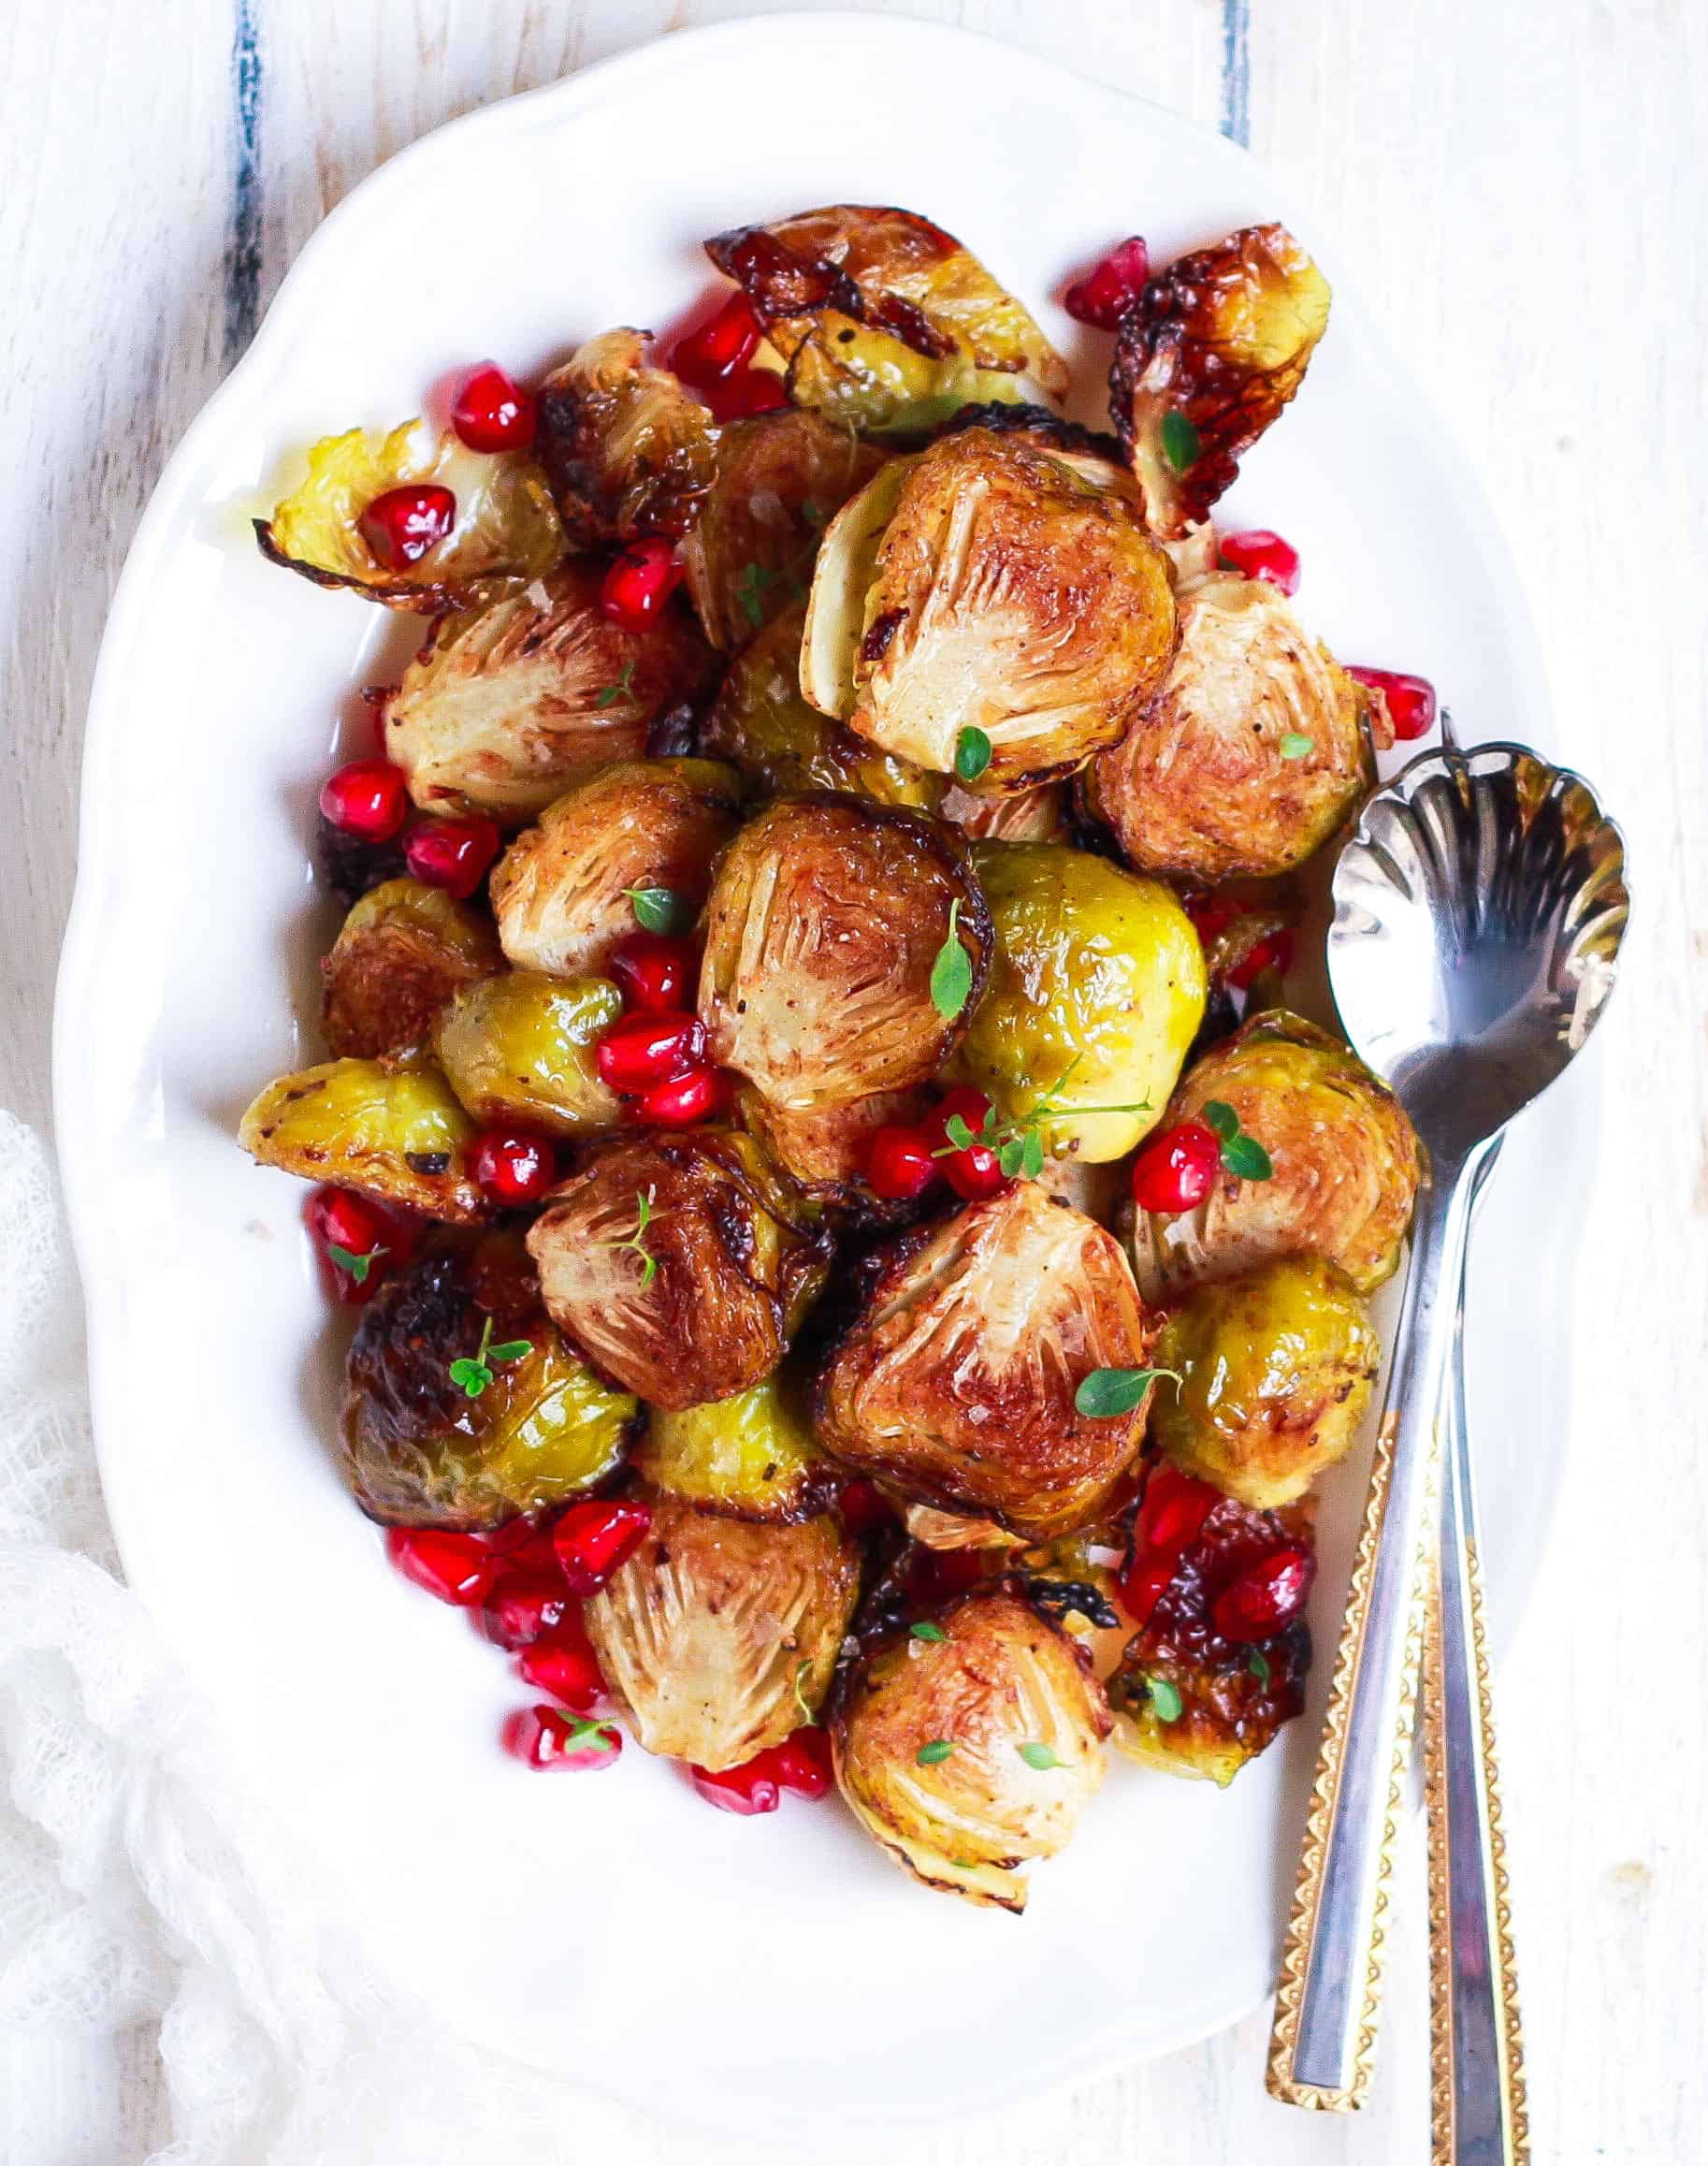 Roasted Brussel Sprouts easy vegan recipe